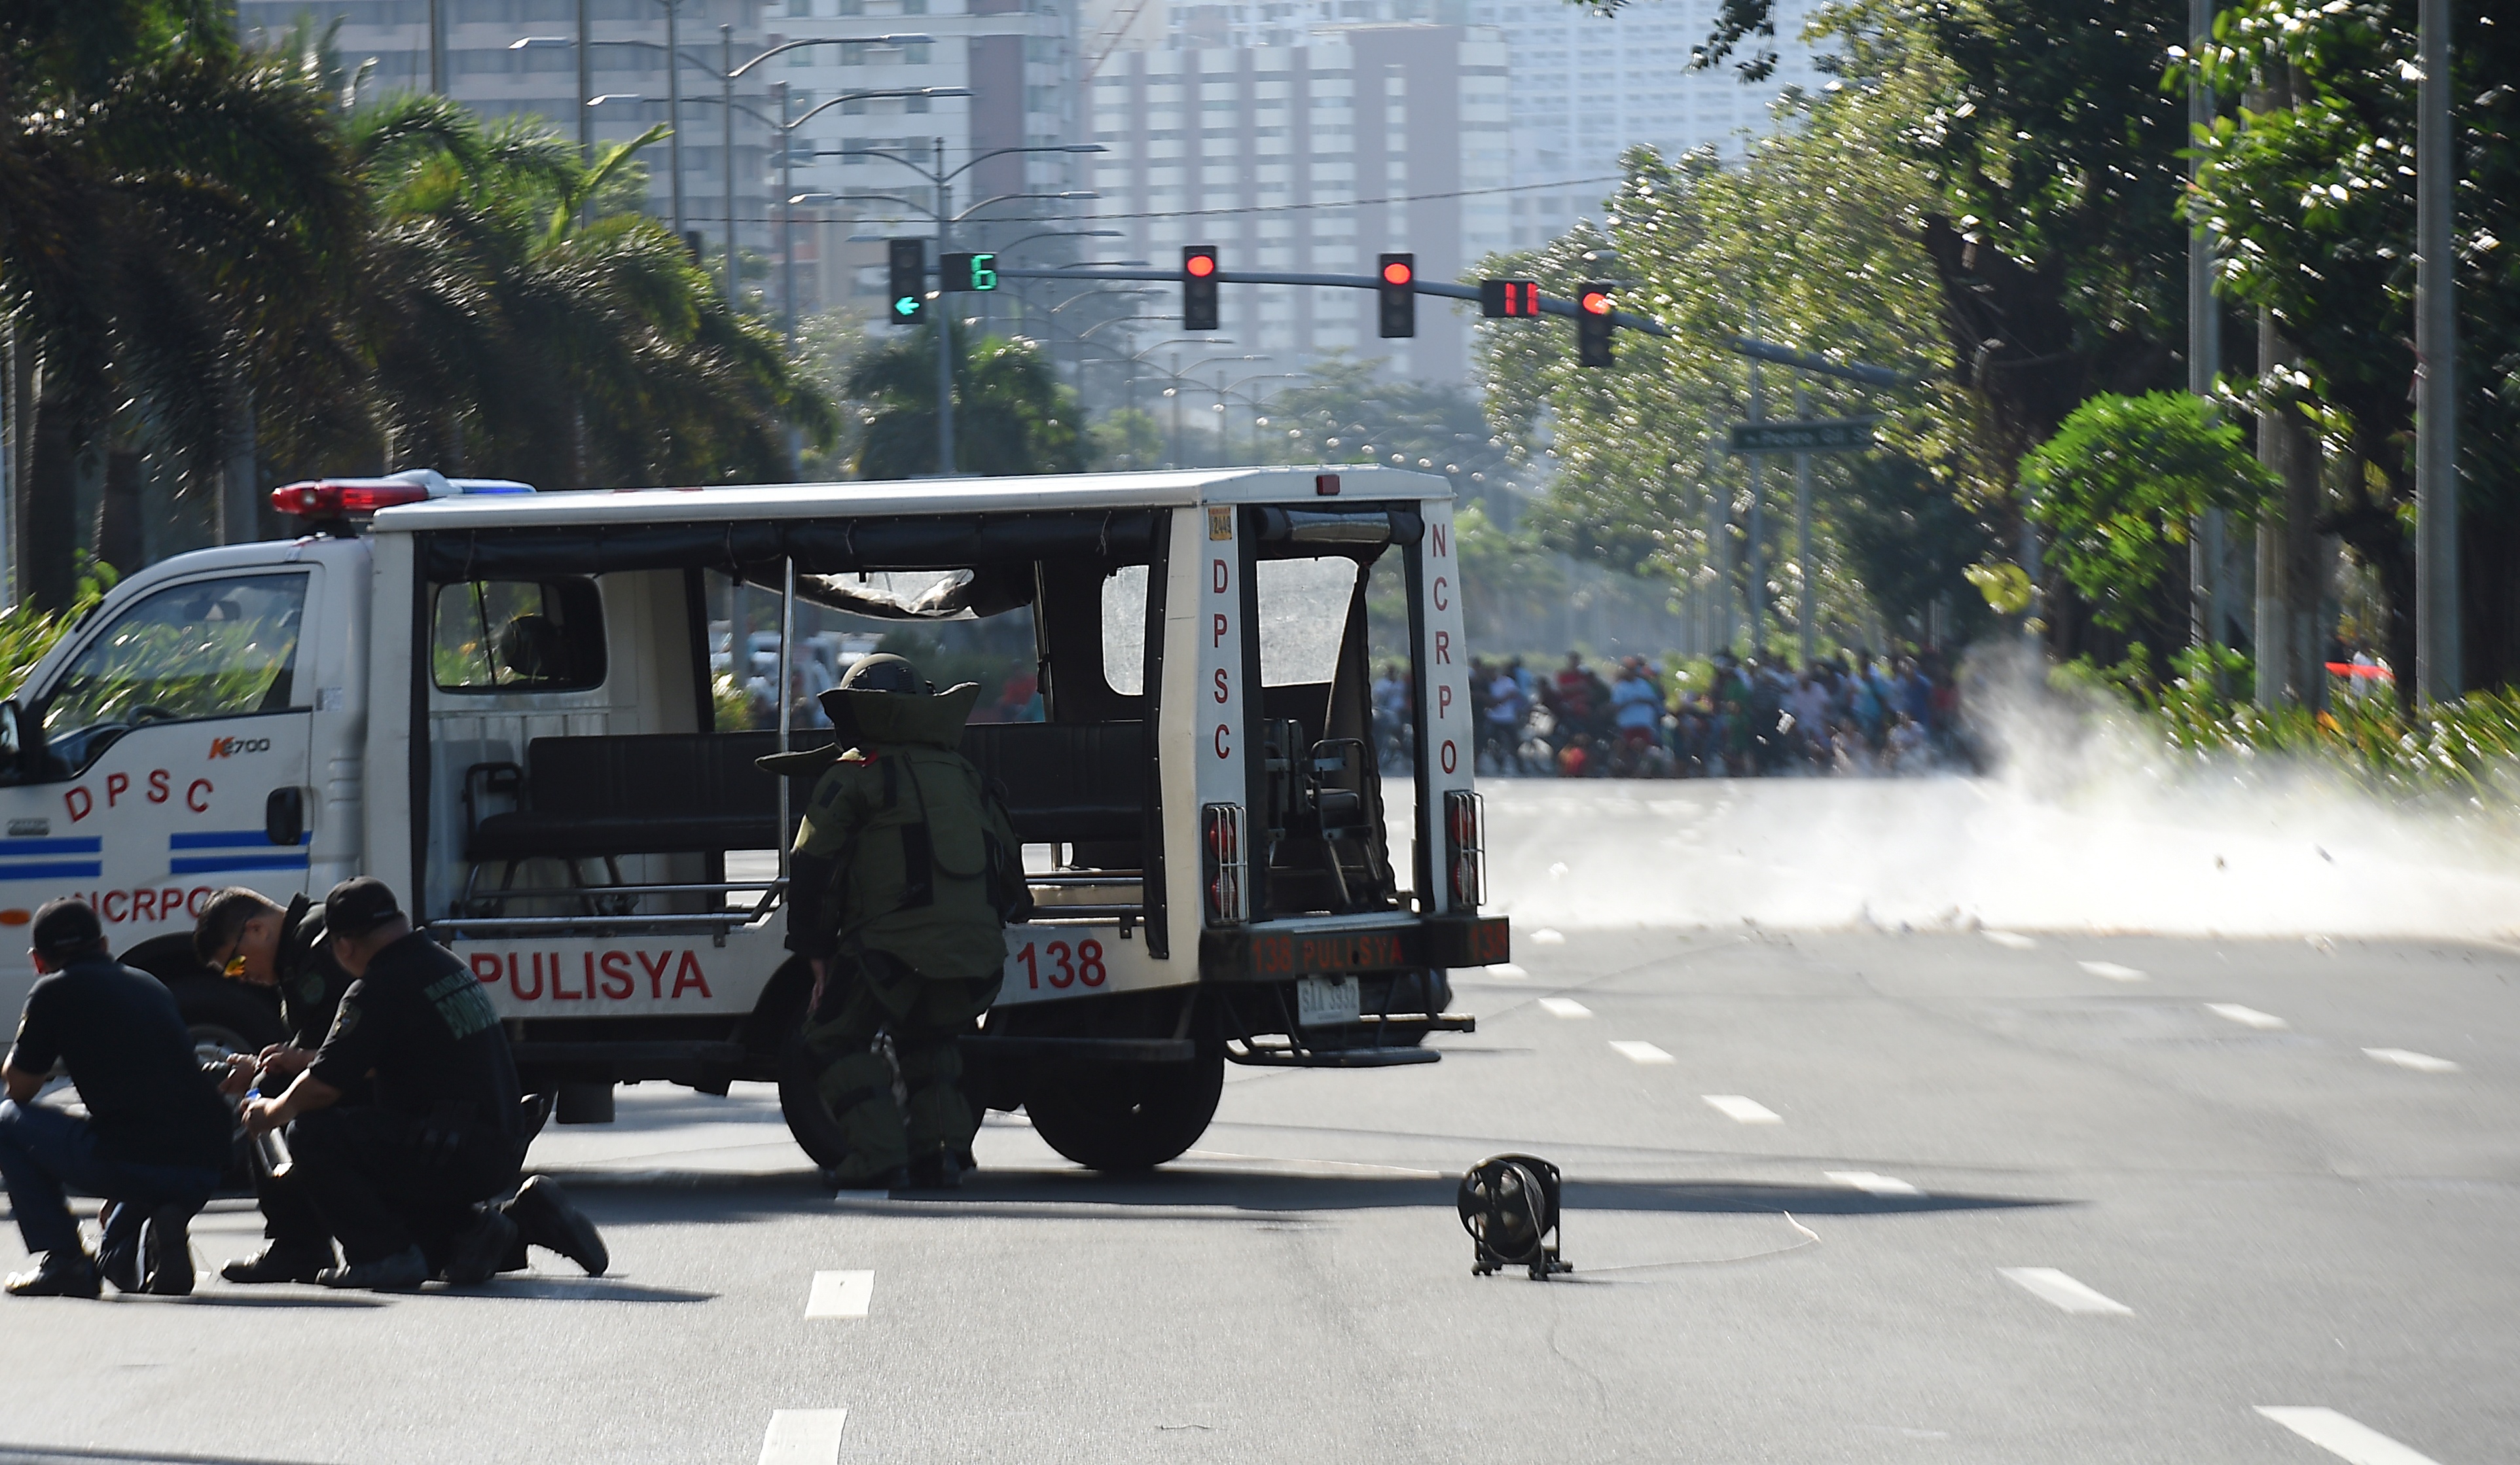 Members of police bomb disposal unit detonate a suspicious package along Roxas boulevard near the US embassy in Manila on November 28, 2016. According to press reports quoting the police, the suspicious package was found inside a box along a with a cell phone and another electronic device, which the police successfully detonated. / AFP PHOTO / TED ALJIBE